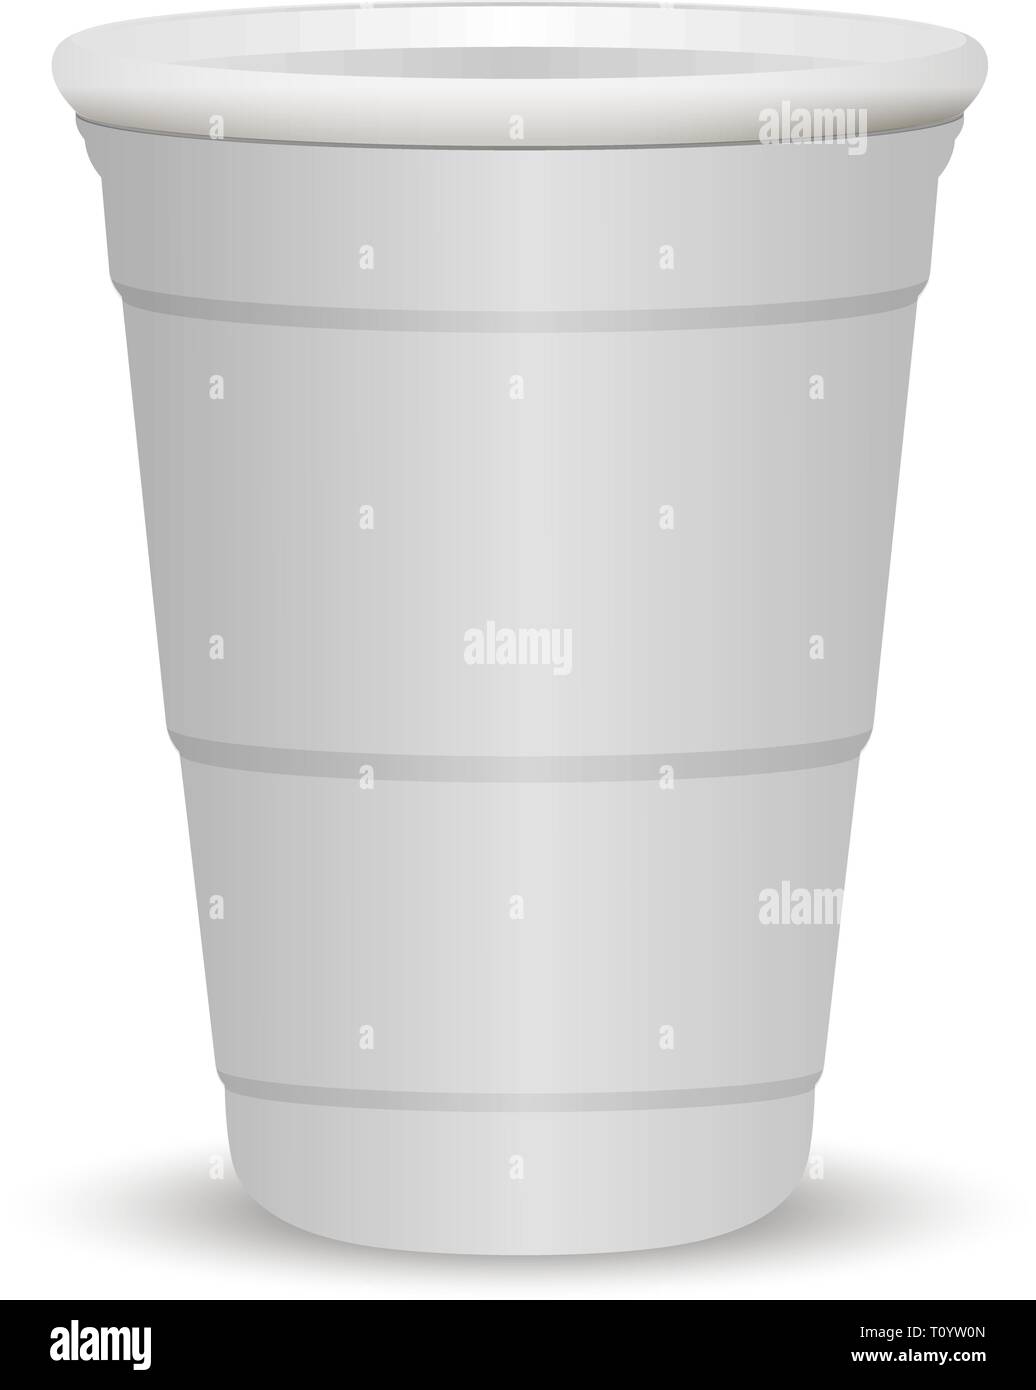 https://c8.alamy.com/comp/T0YW0N/white-party-cup-realistic-3d-vector-illustration-disposable-plastic-or-paper-container-mockup-for-drinks-and-fun-games-isolated-on-white-background-T0YW0N.jpg